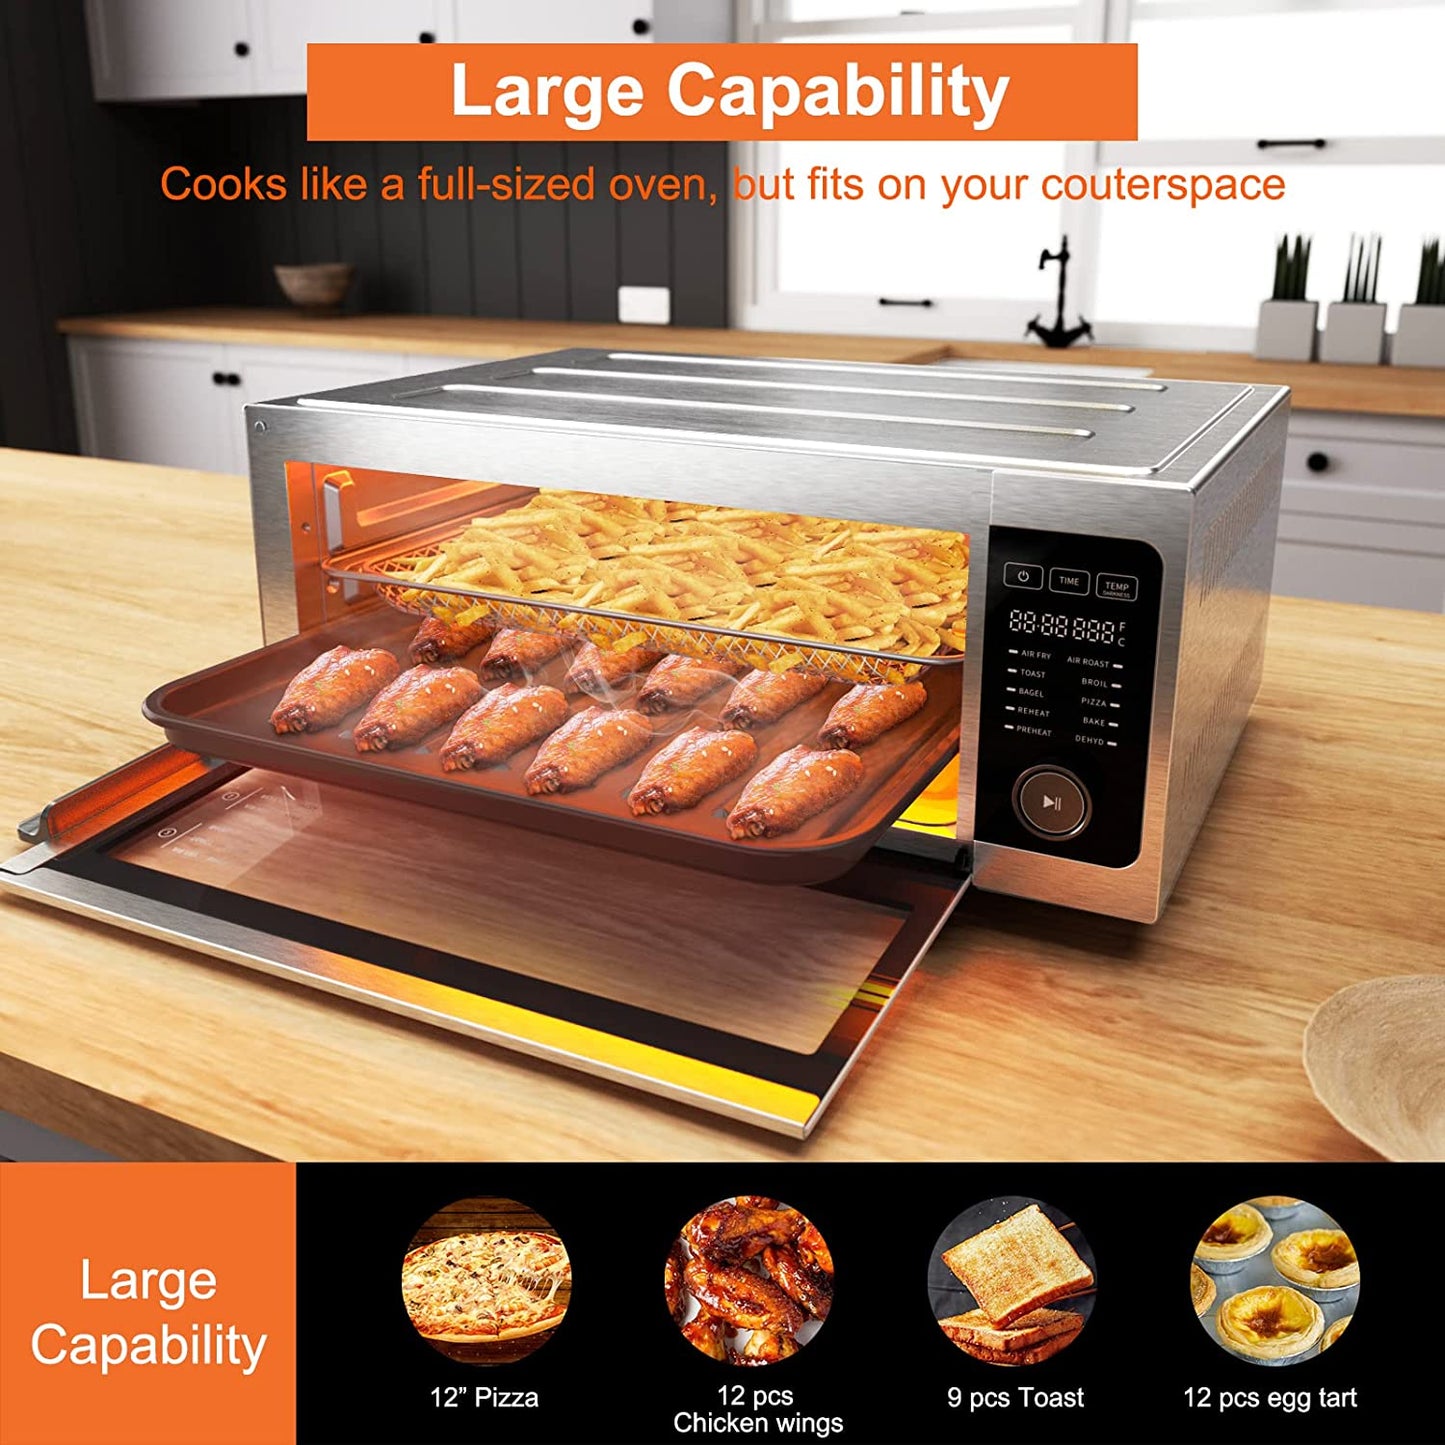 10-In-1 Countertop Convection Oven - Air Fryer Toaster Oven Combo with 1800W Power, Convenient Flip up & Away Design for Space Saving, Oil-Less Cooking, Fits 12" Pizza, Toasts 9 Slices, and Includes 5 Essential Accessories